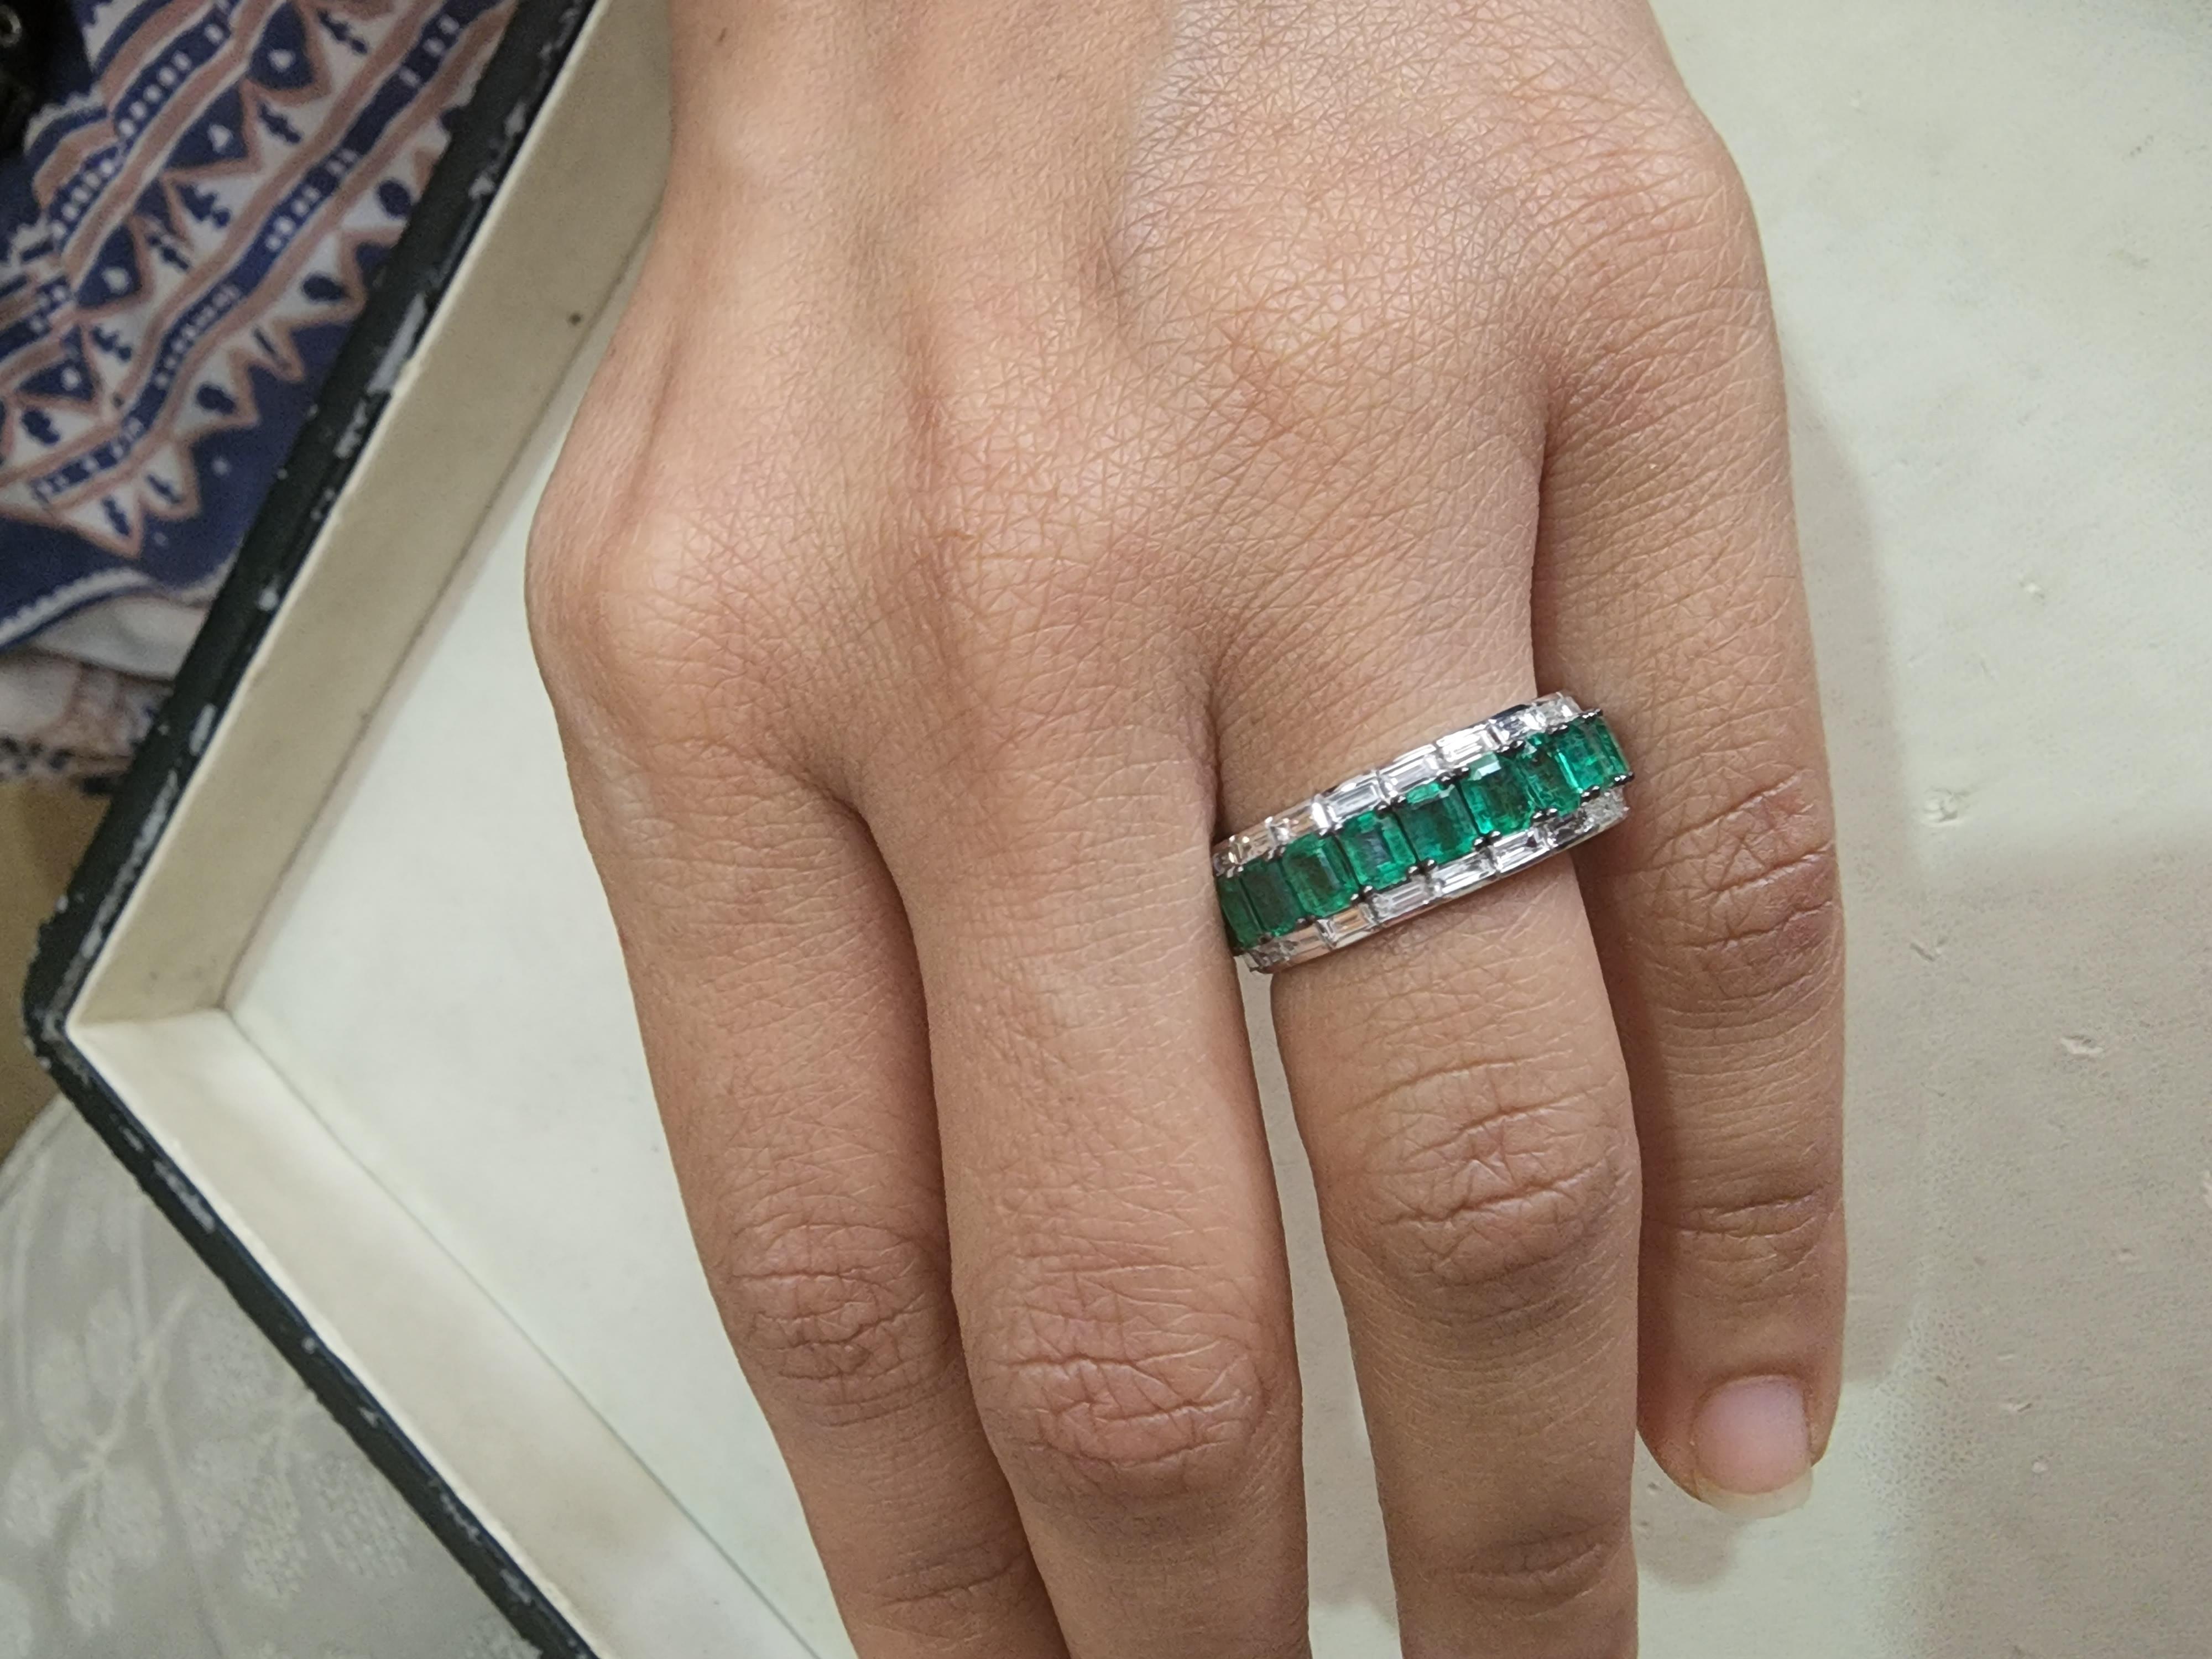 Emerald : 5.98 carats
Diamonds : 1.56 carats
Gold : 5.5 gms (18k)
This a a band which has emeralds and diamonds . It was a custom order size 9.5 for someone who decided not to take.
Its very hard to capture the true color and luster of the emerald ,